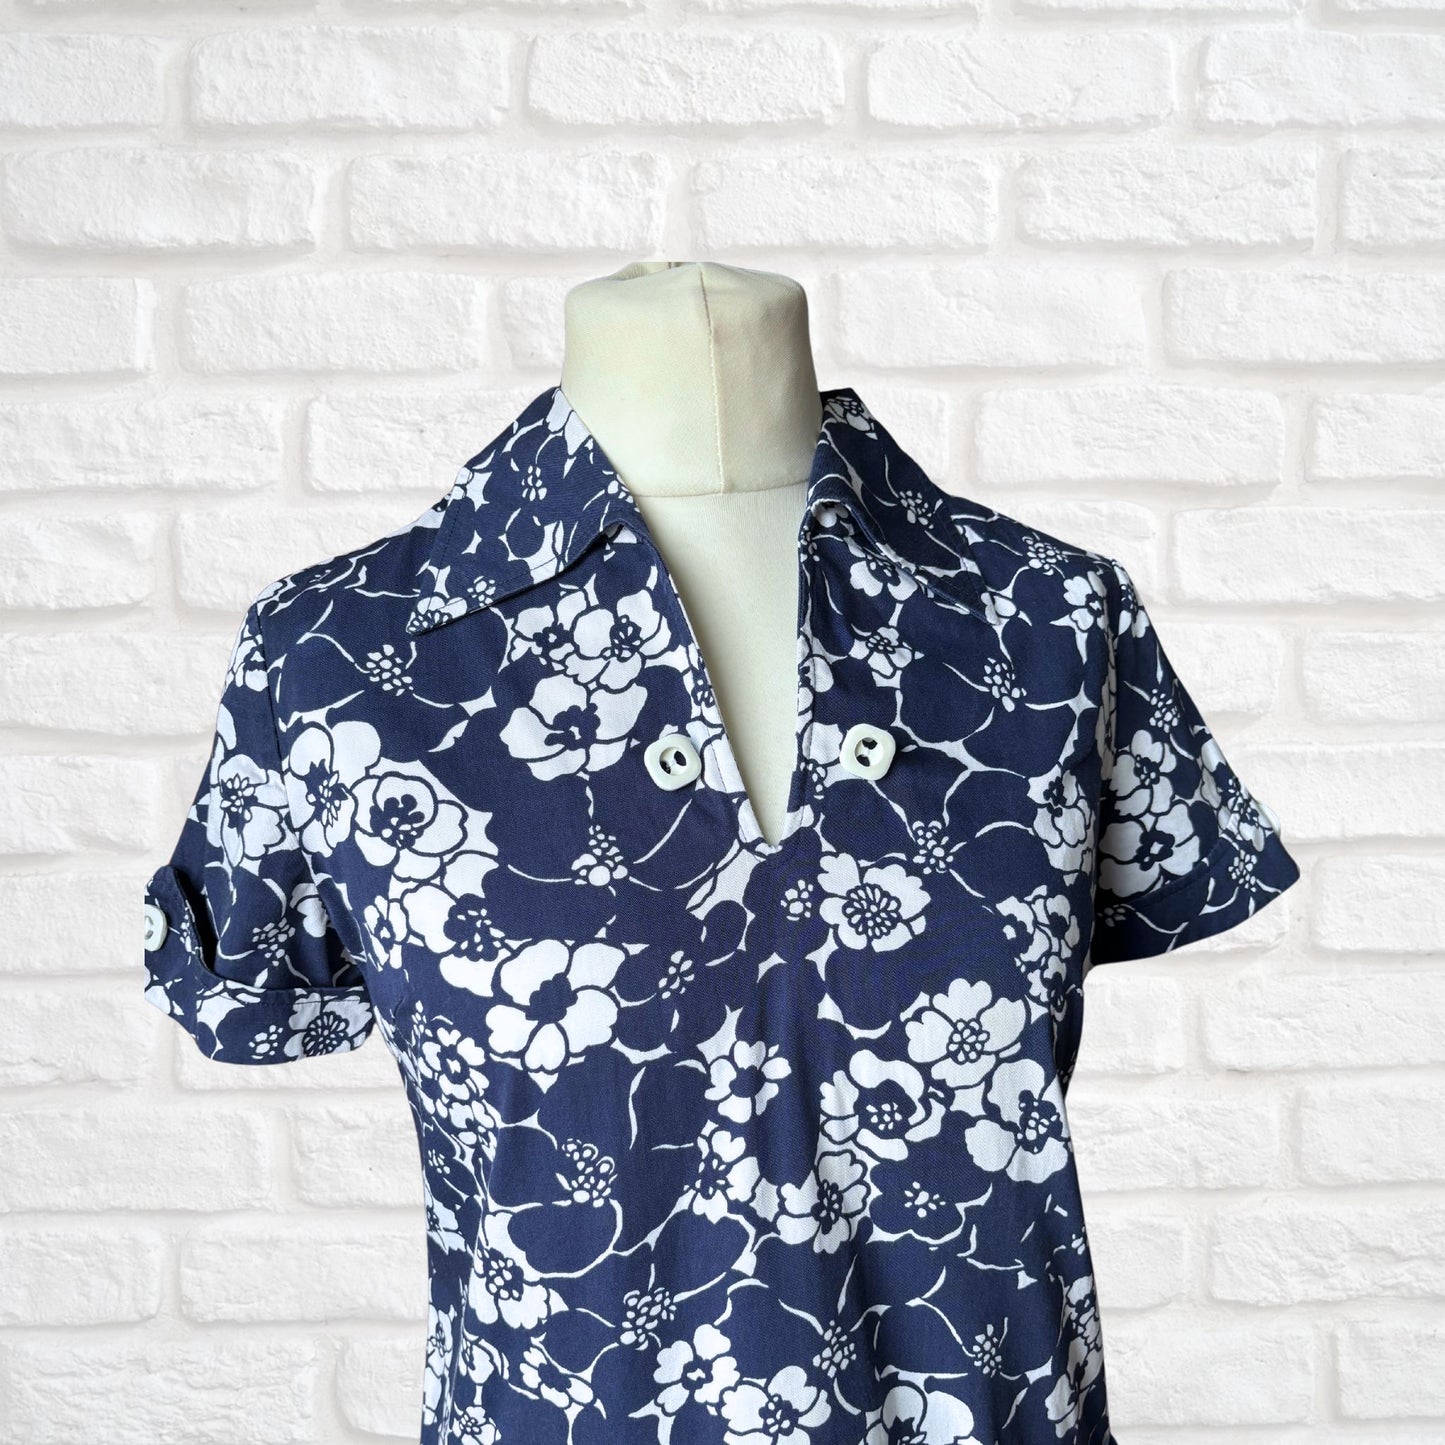 Navy Blue and White Floral Cotton 60s Mini Dress by St. Michael. Approx UK size  10- 12